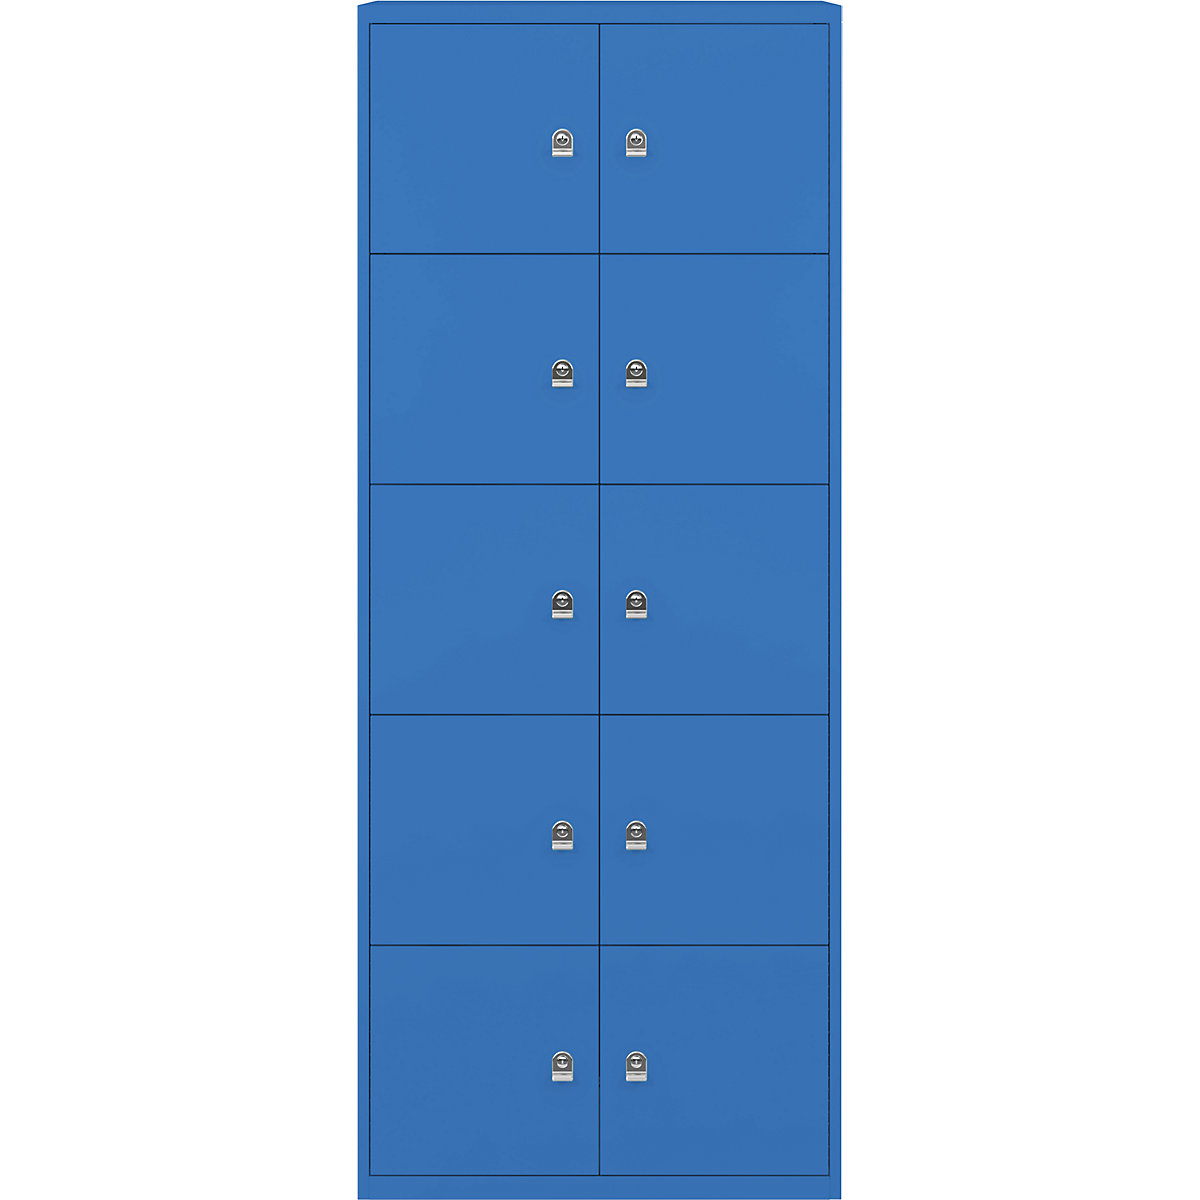 BISLEY – LateralFile™ lodge, with 10 lockable compartments, height 375 mm each, blue